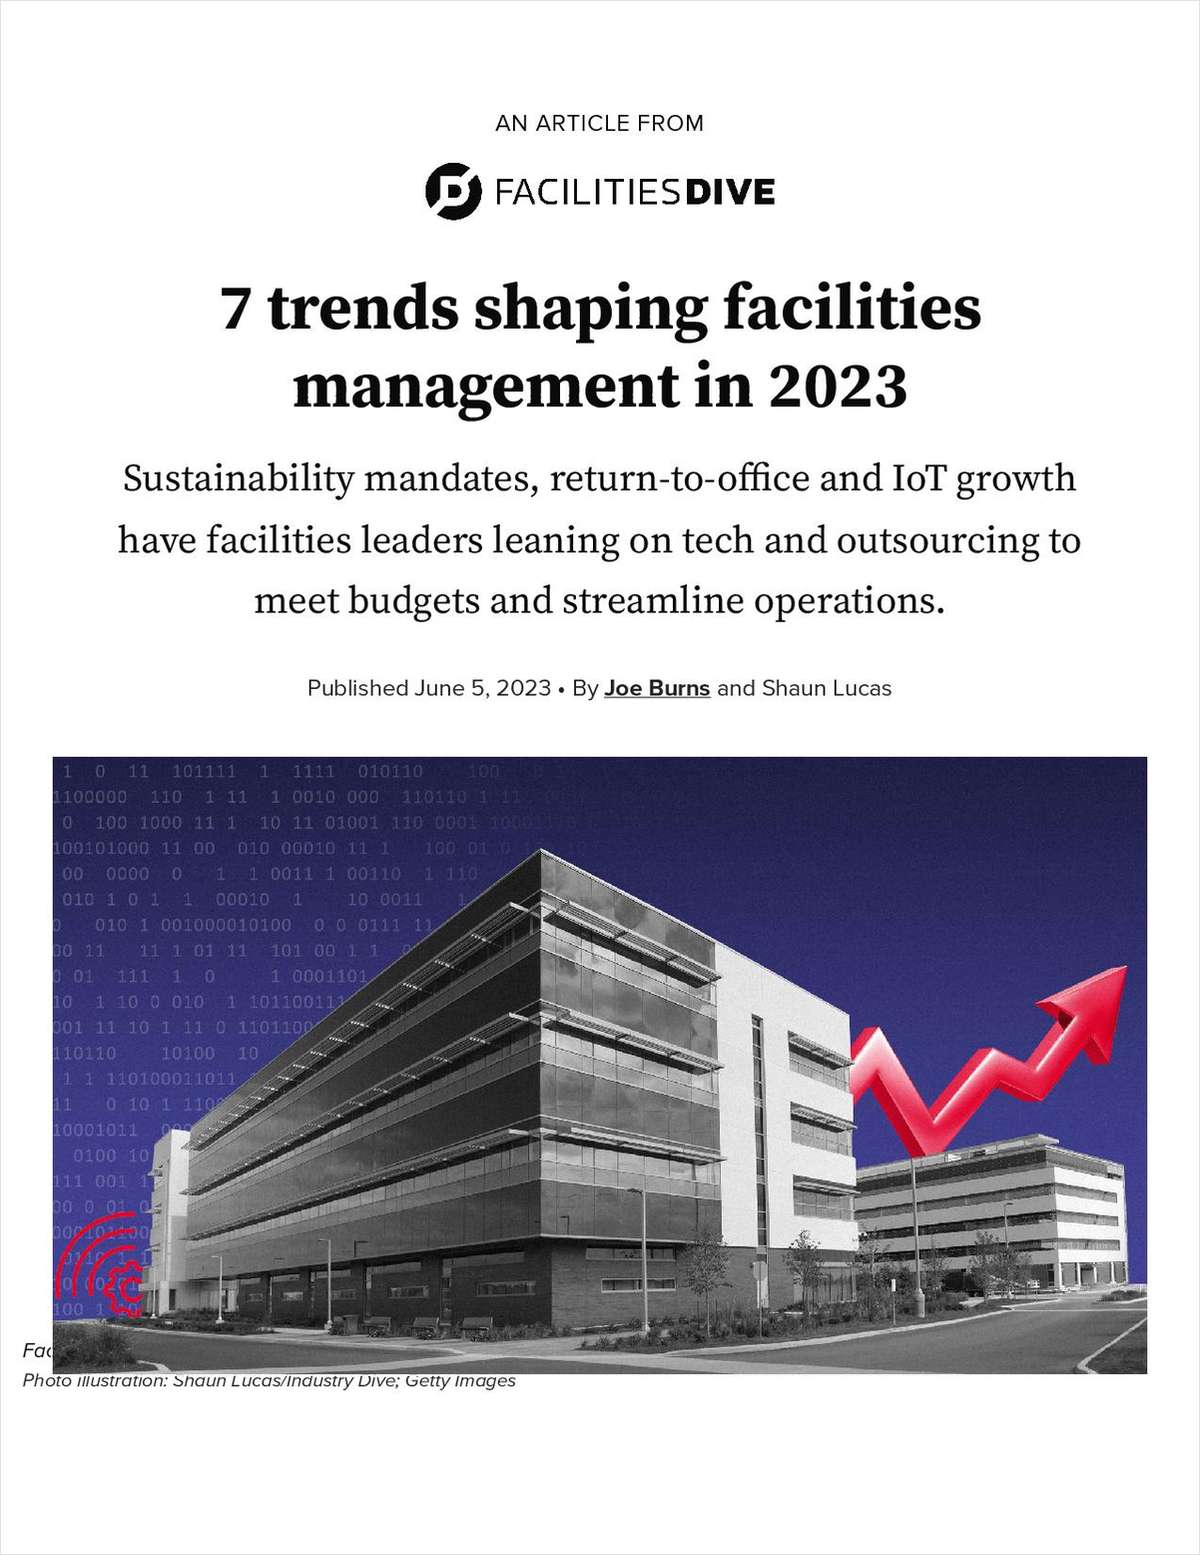 7 Trends Shaping Facilities Management in 2023